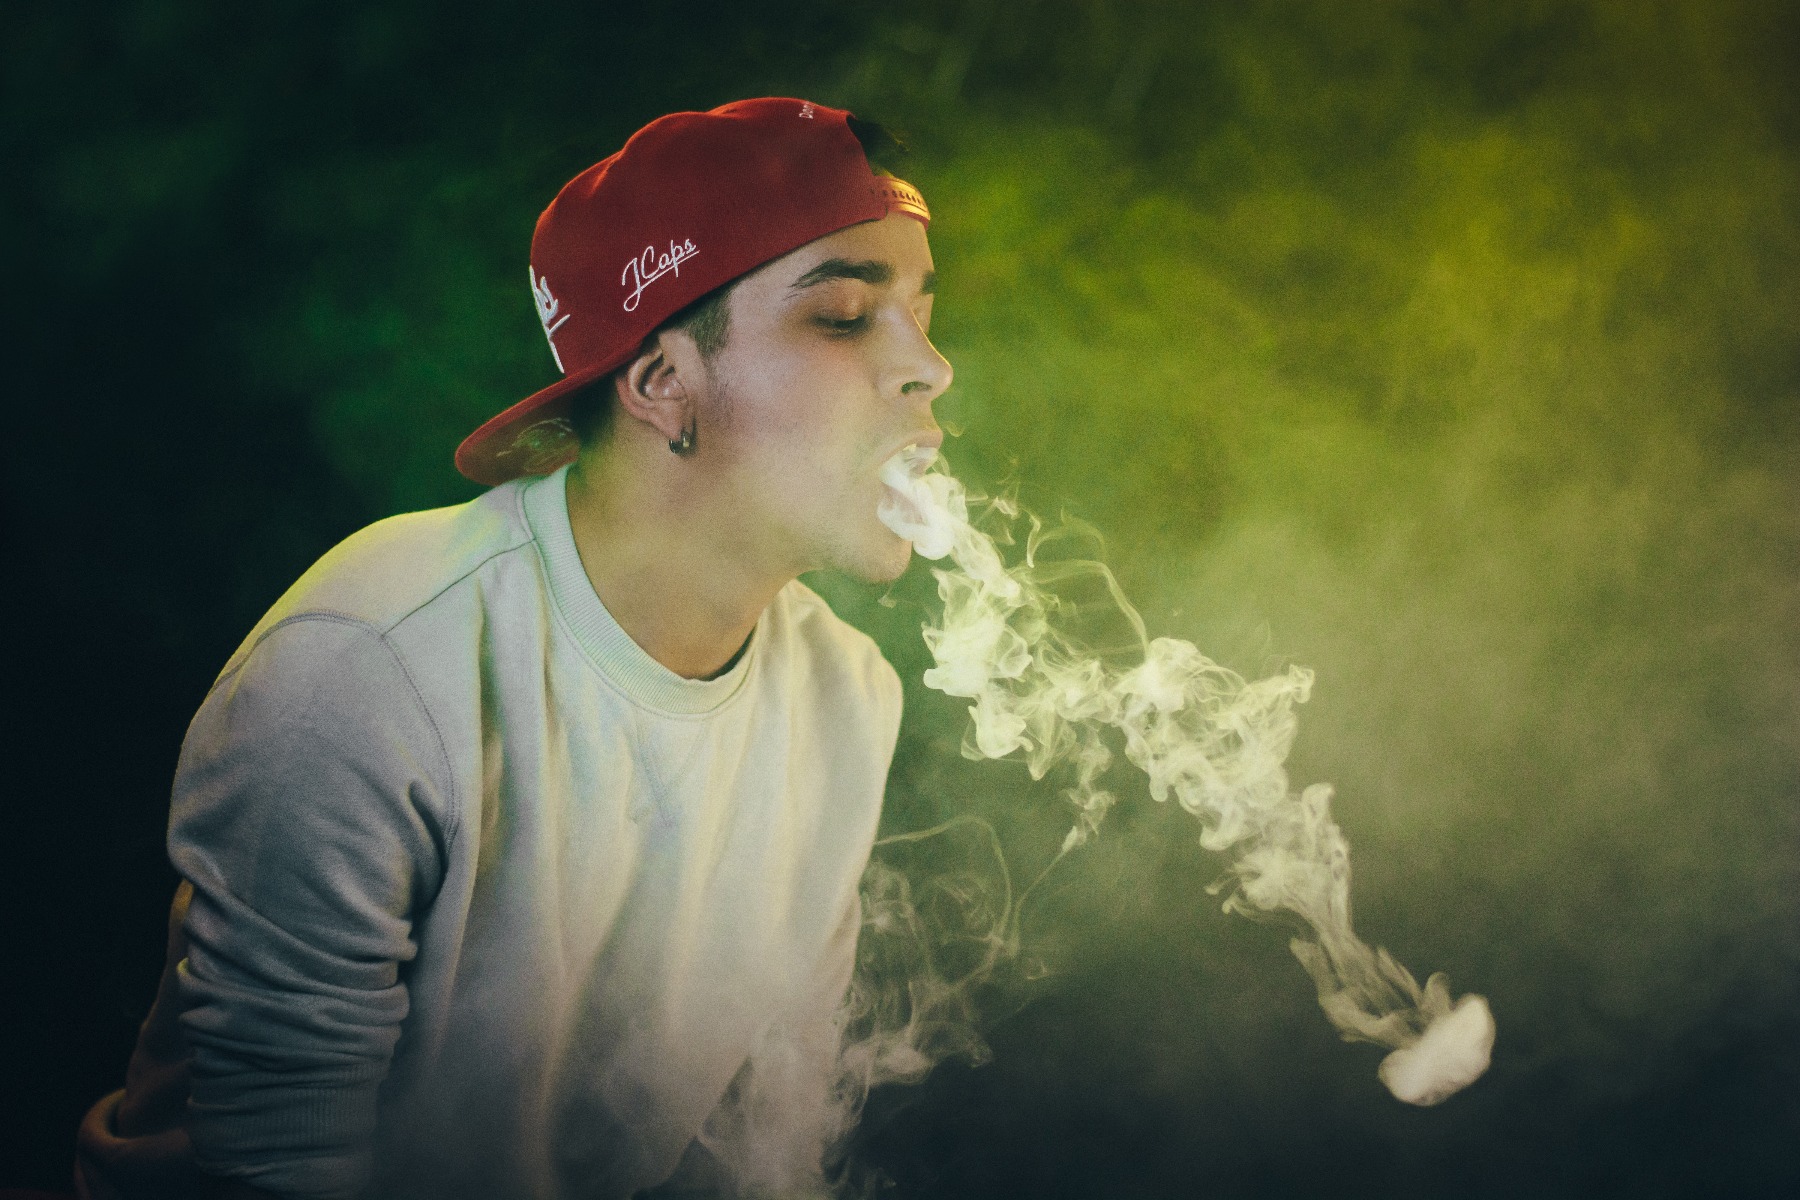 From smoking to vaping – what are the benefits?